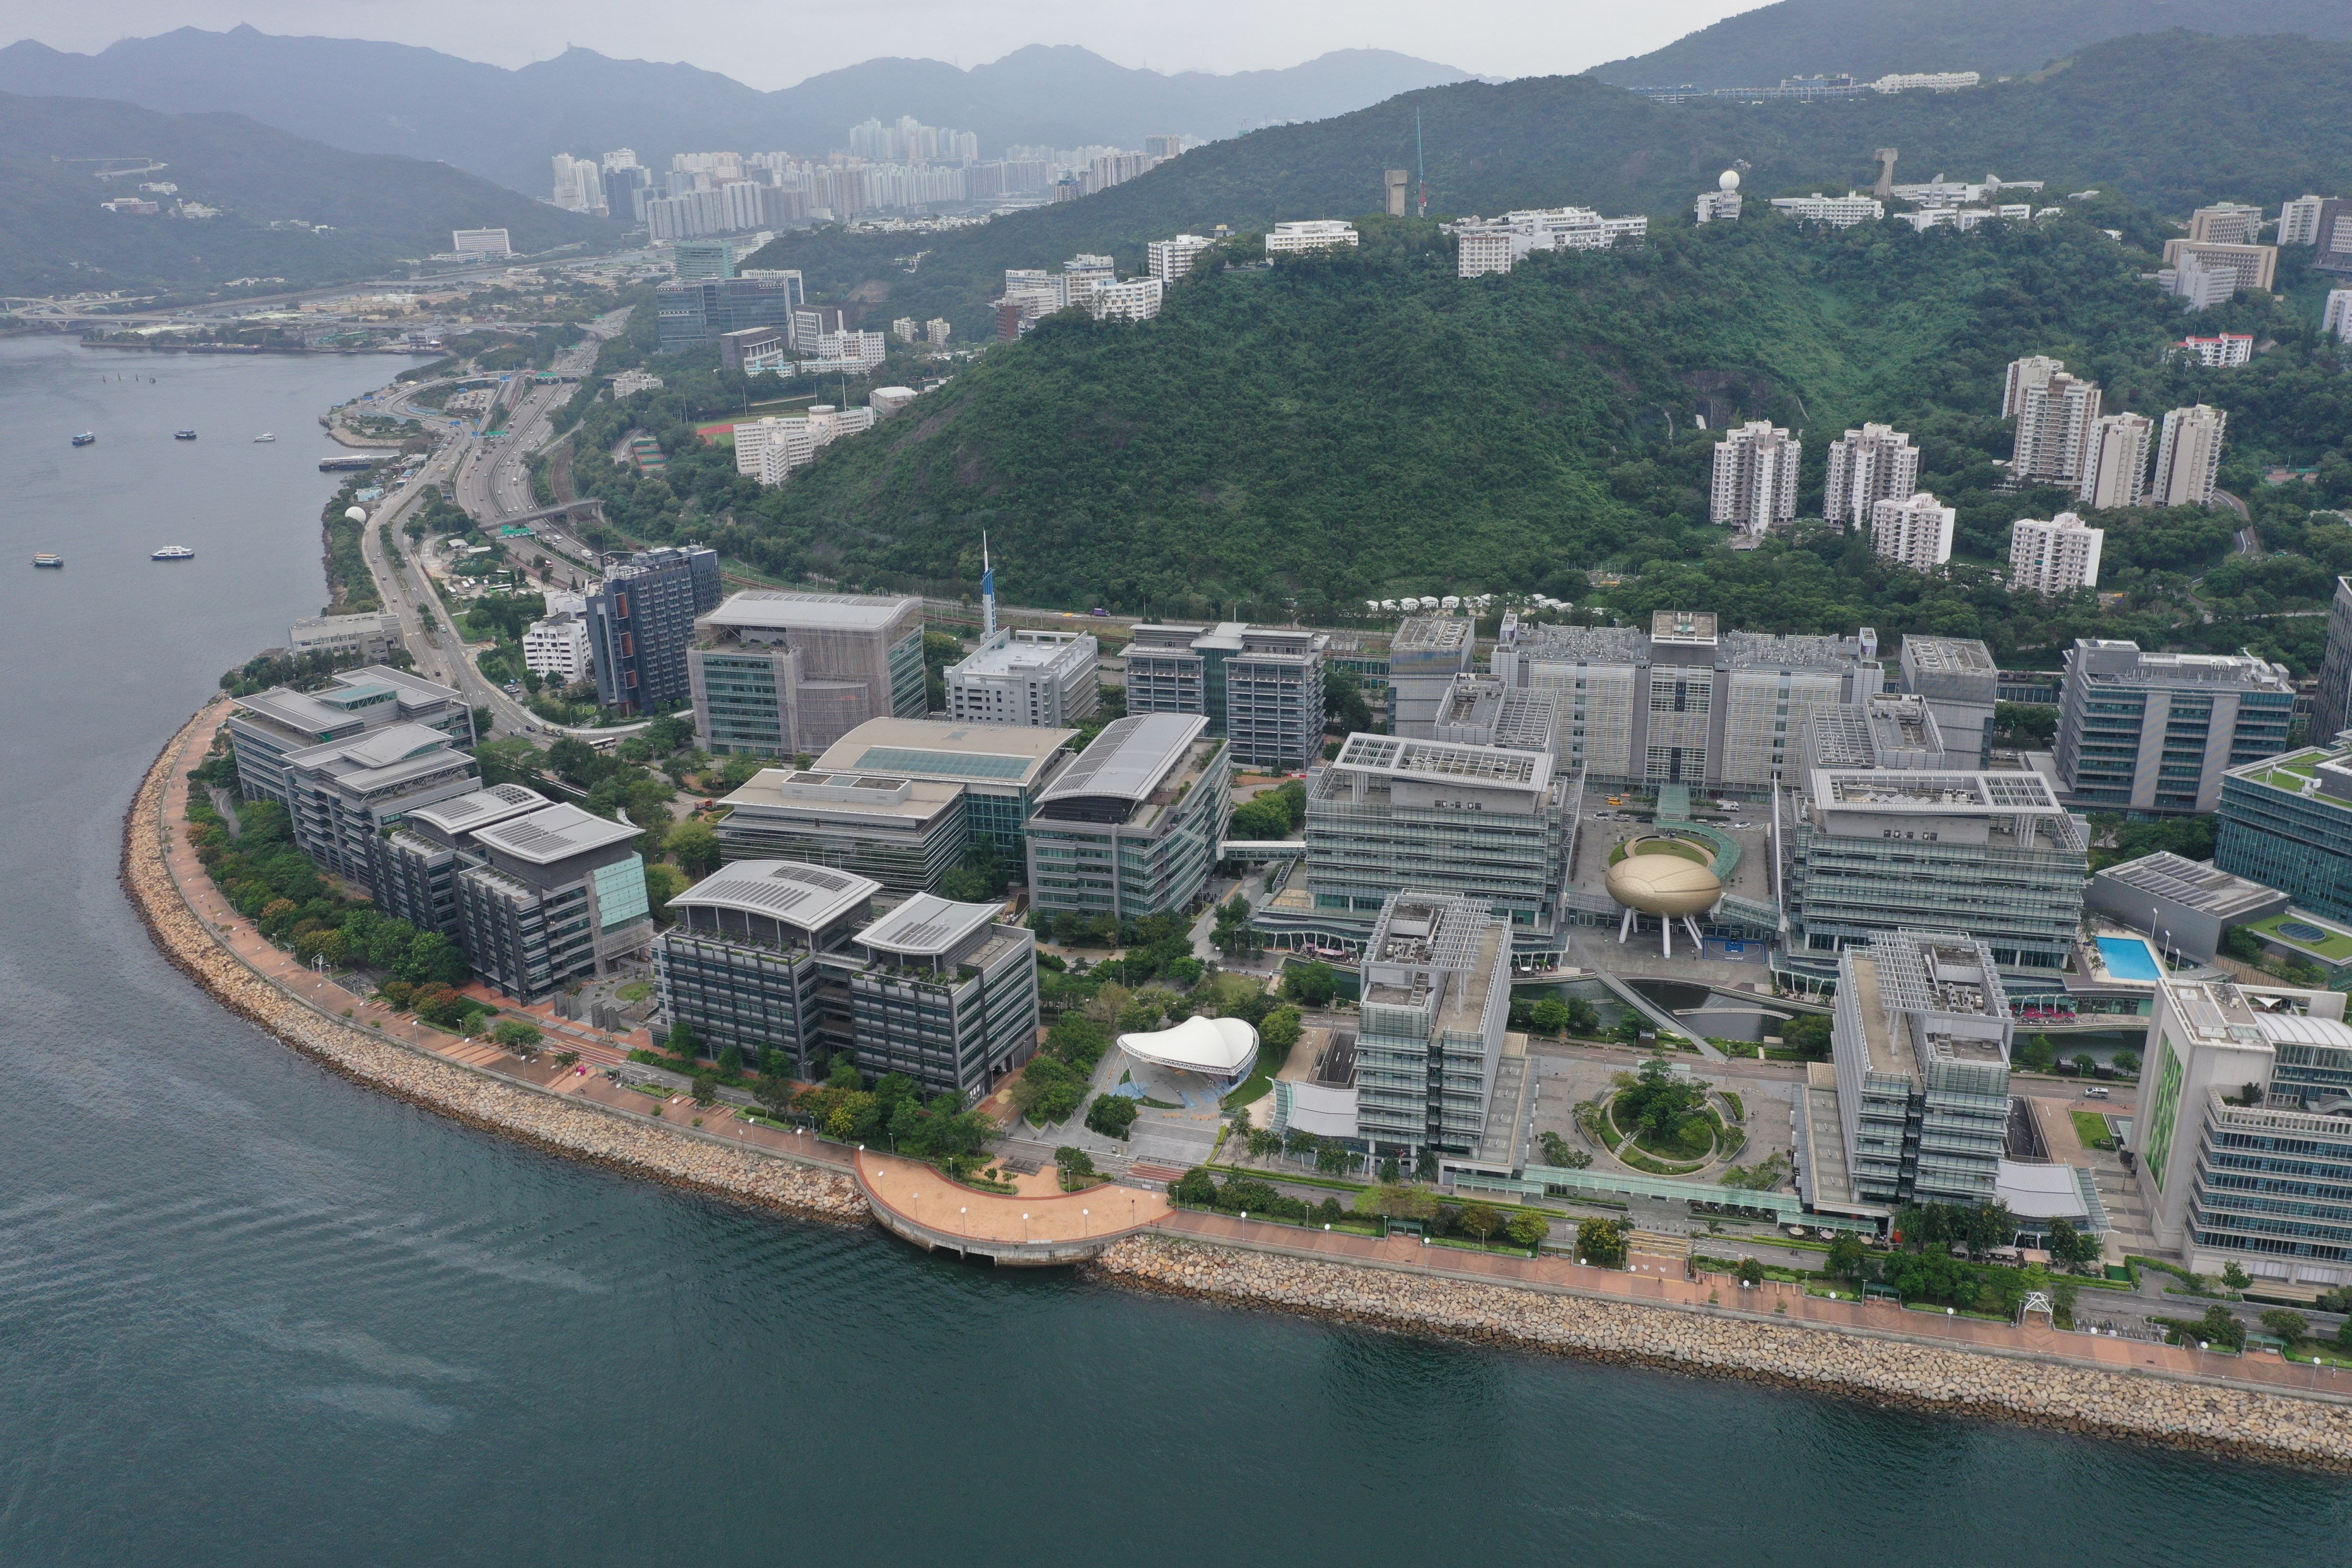 Hong Kong Science Park in Pak Shek Kok on October 6. The city’s world-class universities and innovative start-up culture make it well-poised to add value to the future of the Greater Bay Area. Photo: Winson Wong